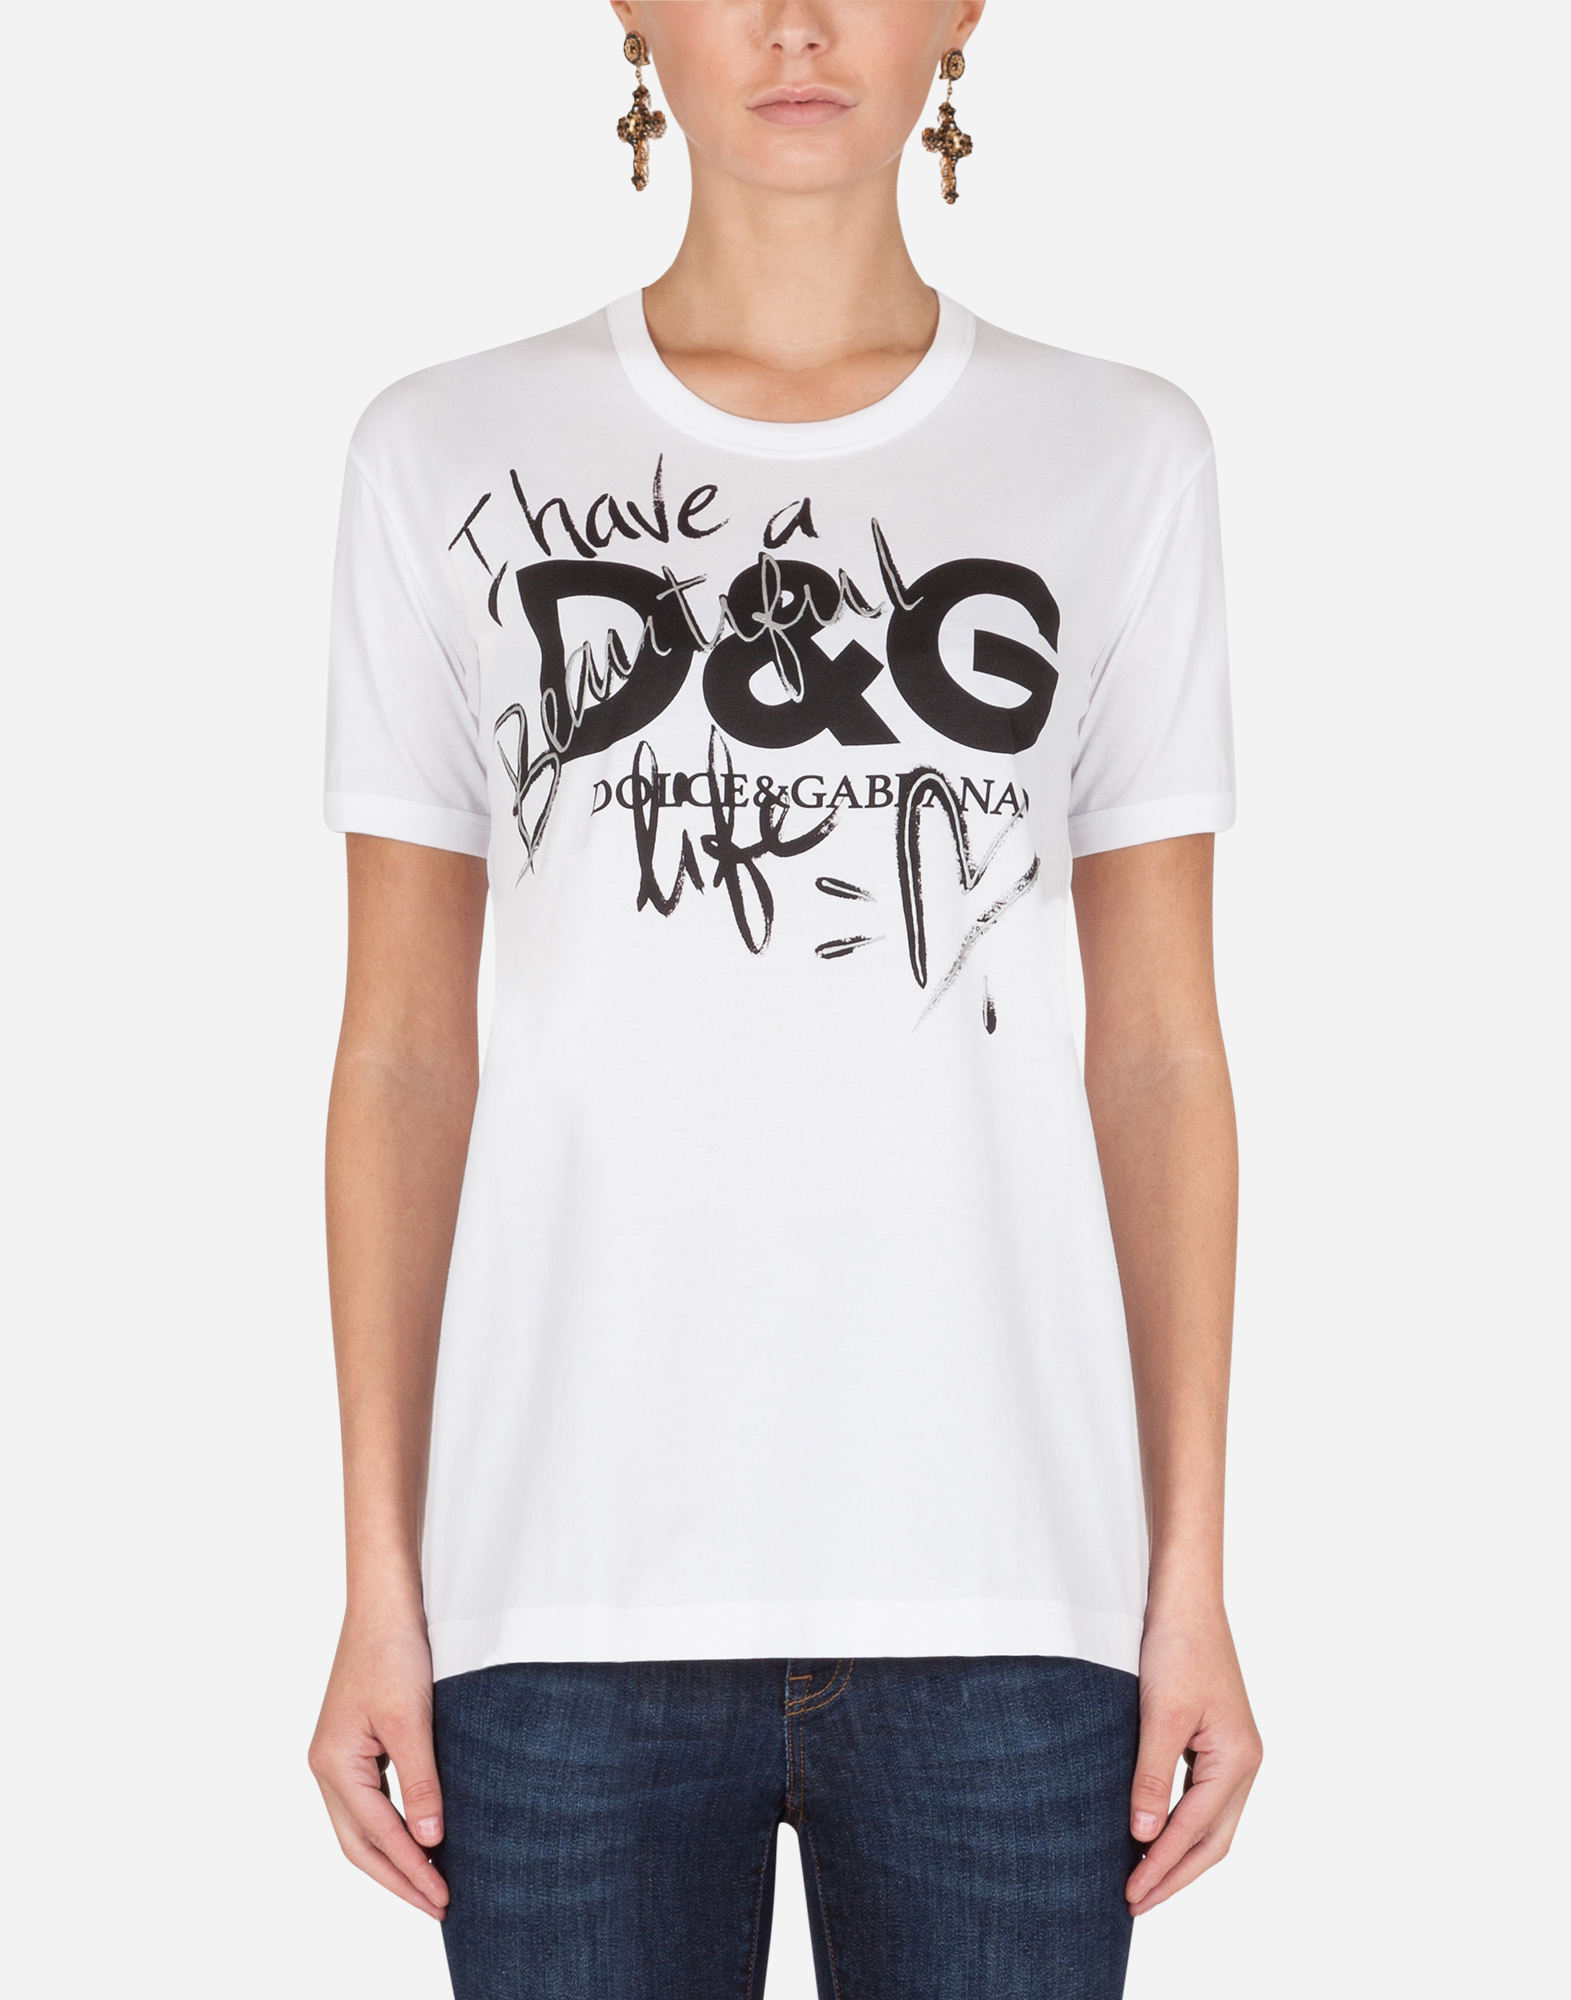 Printed cotton t-shirt in White/Black